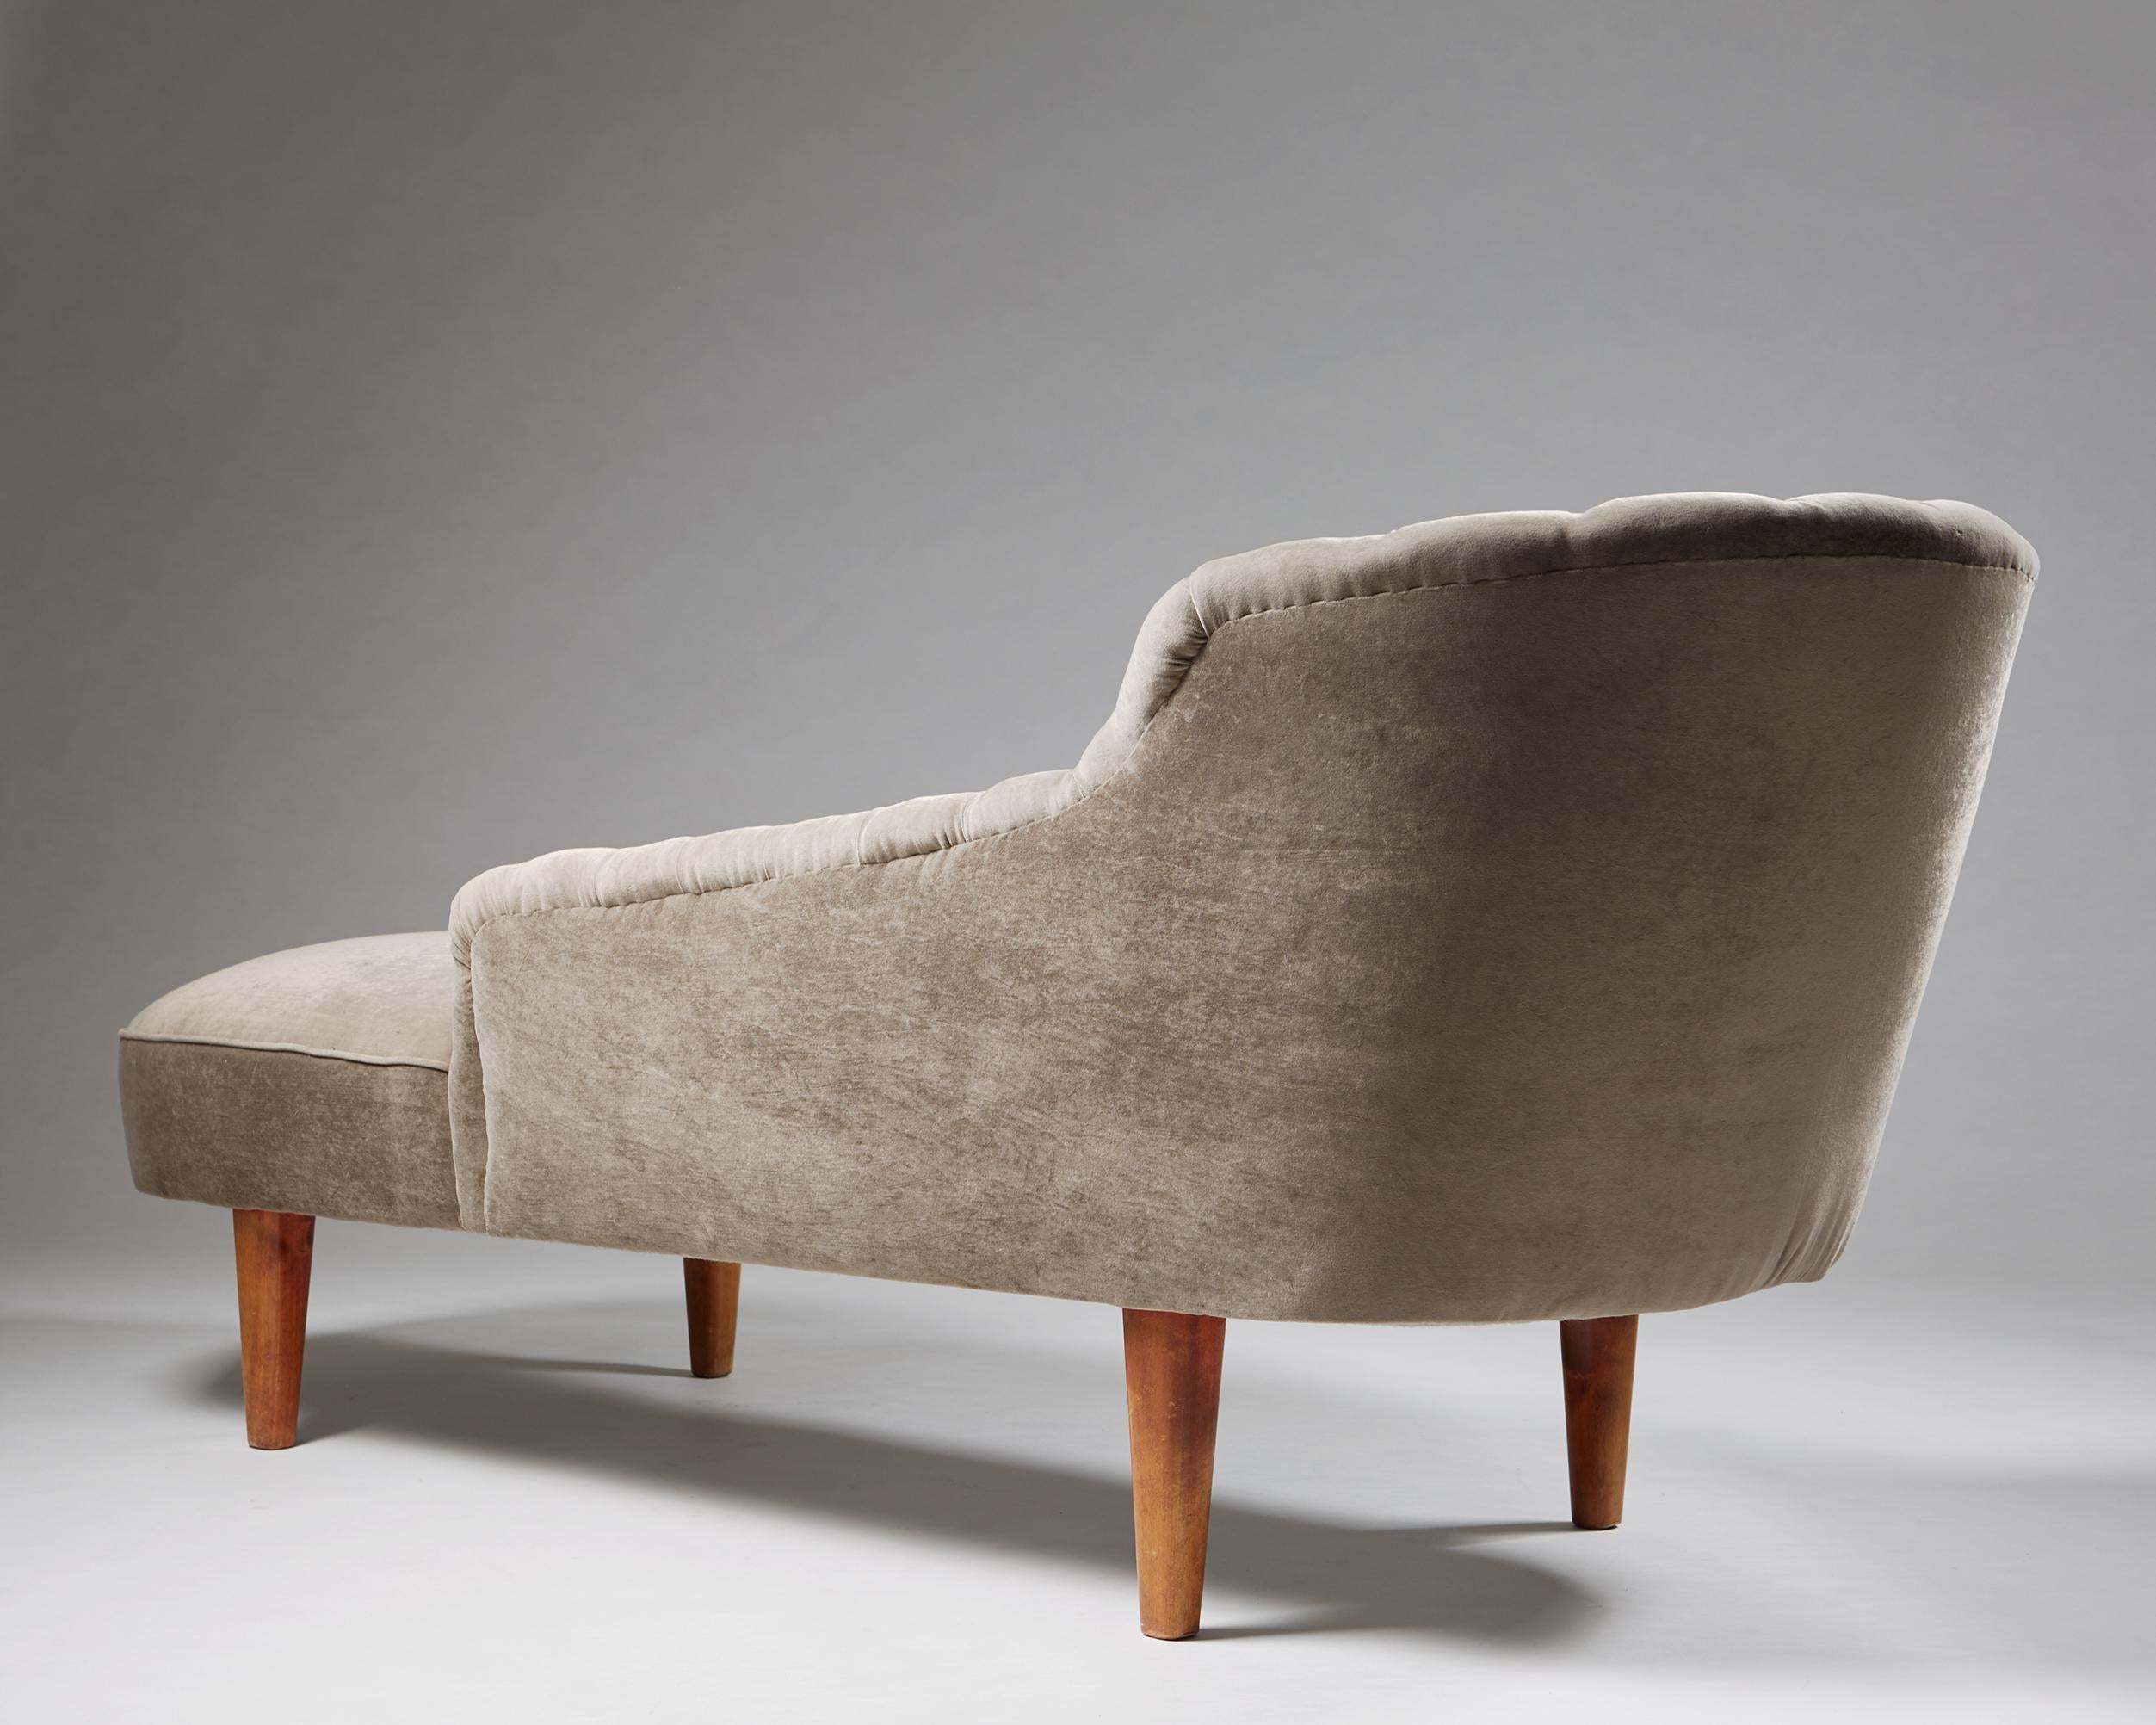 Mid-20th Century Chaise Longue Attributed to Greta Magnusson-Grossman, Sweden, 1950s